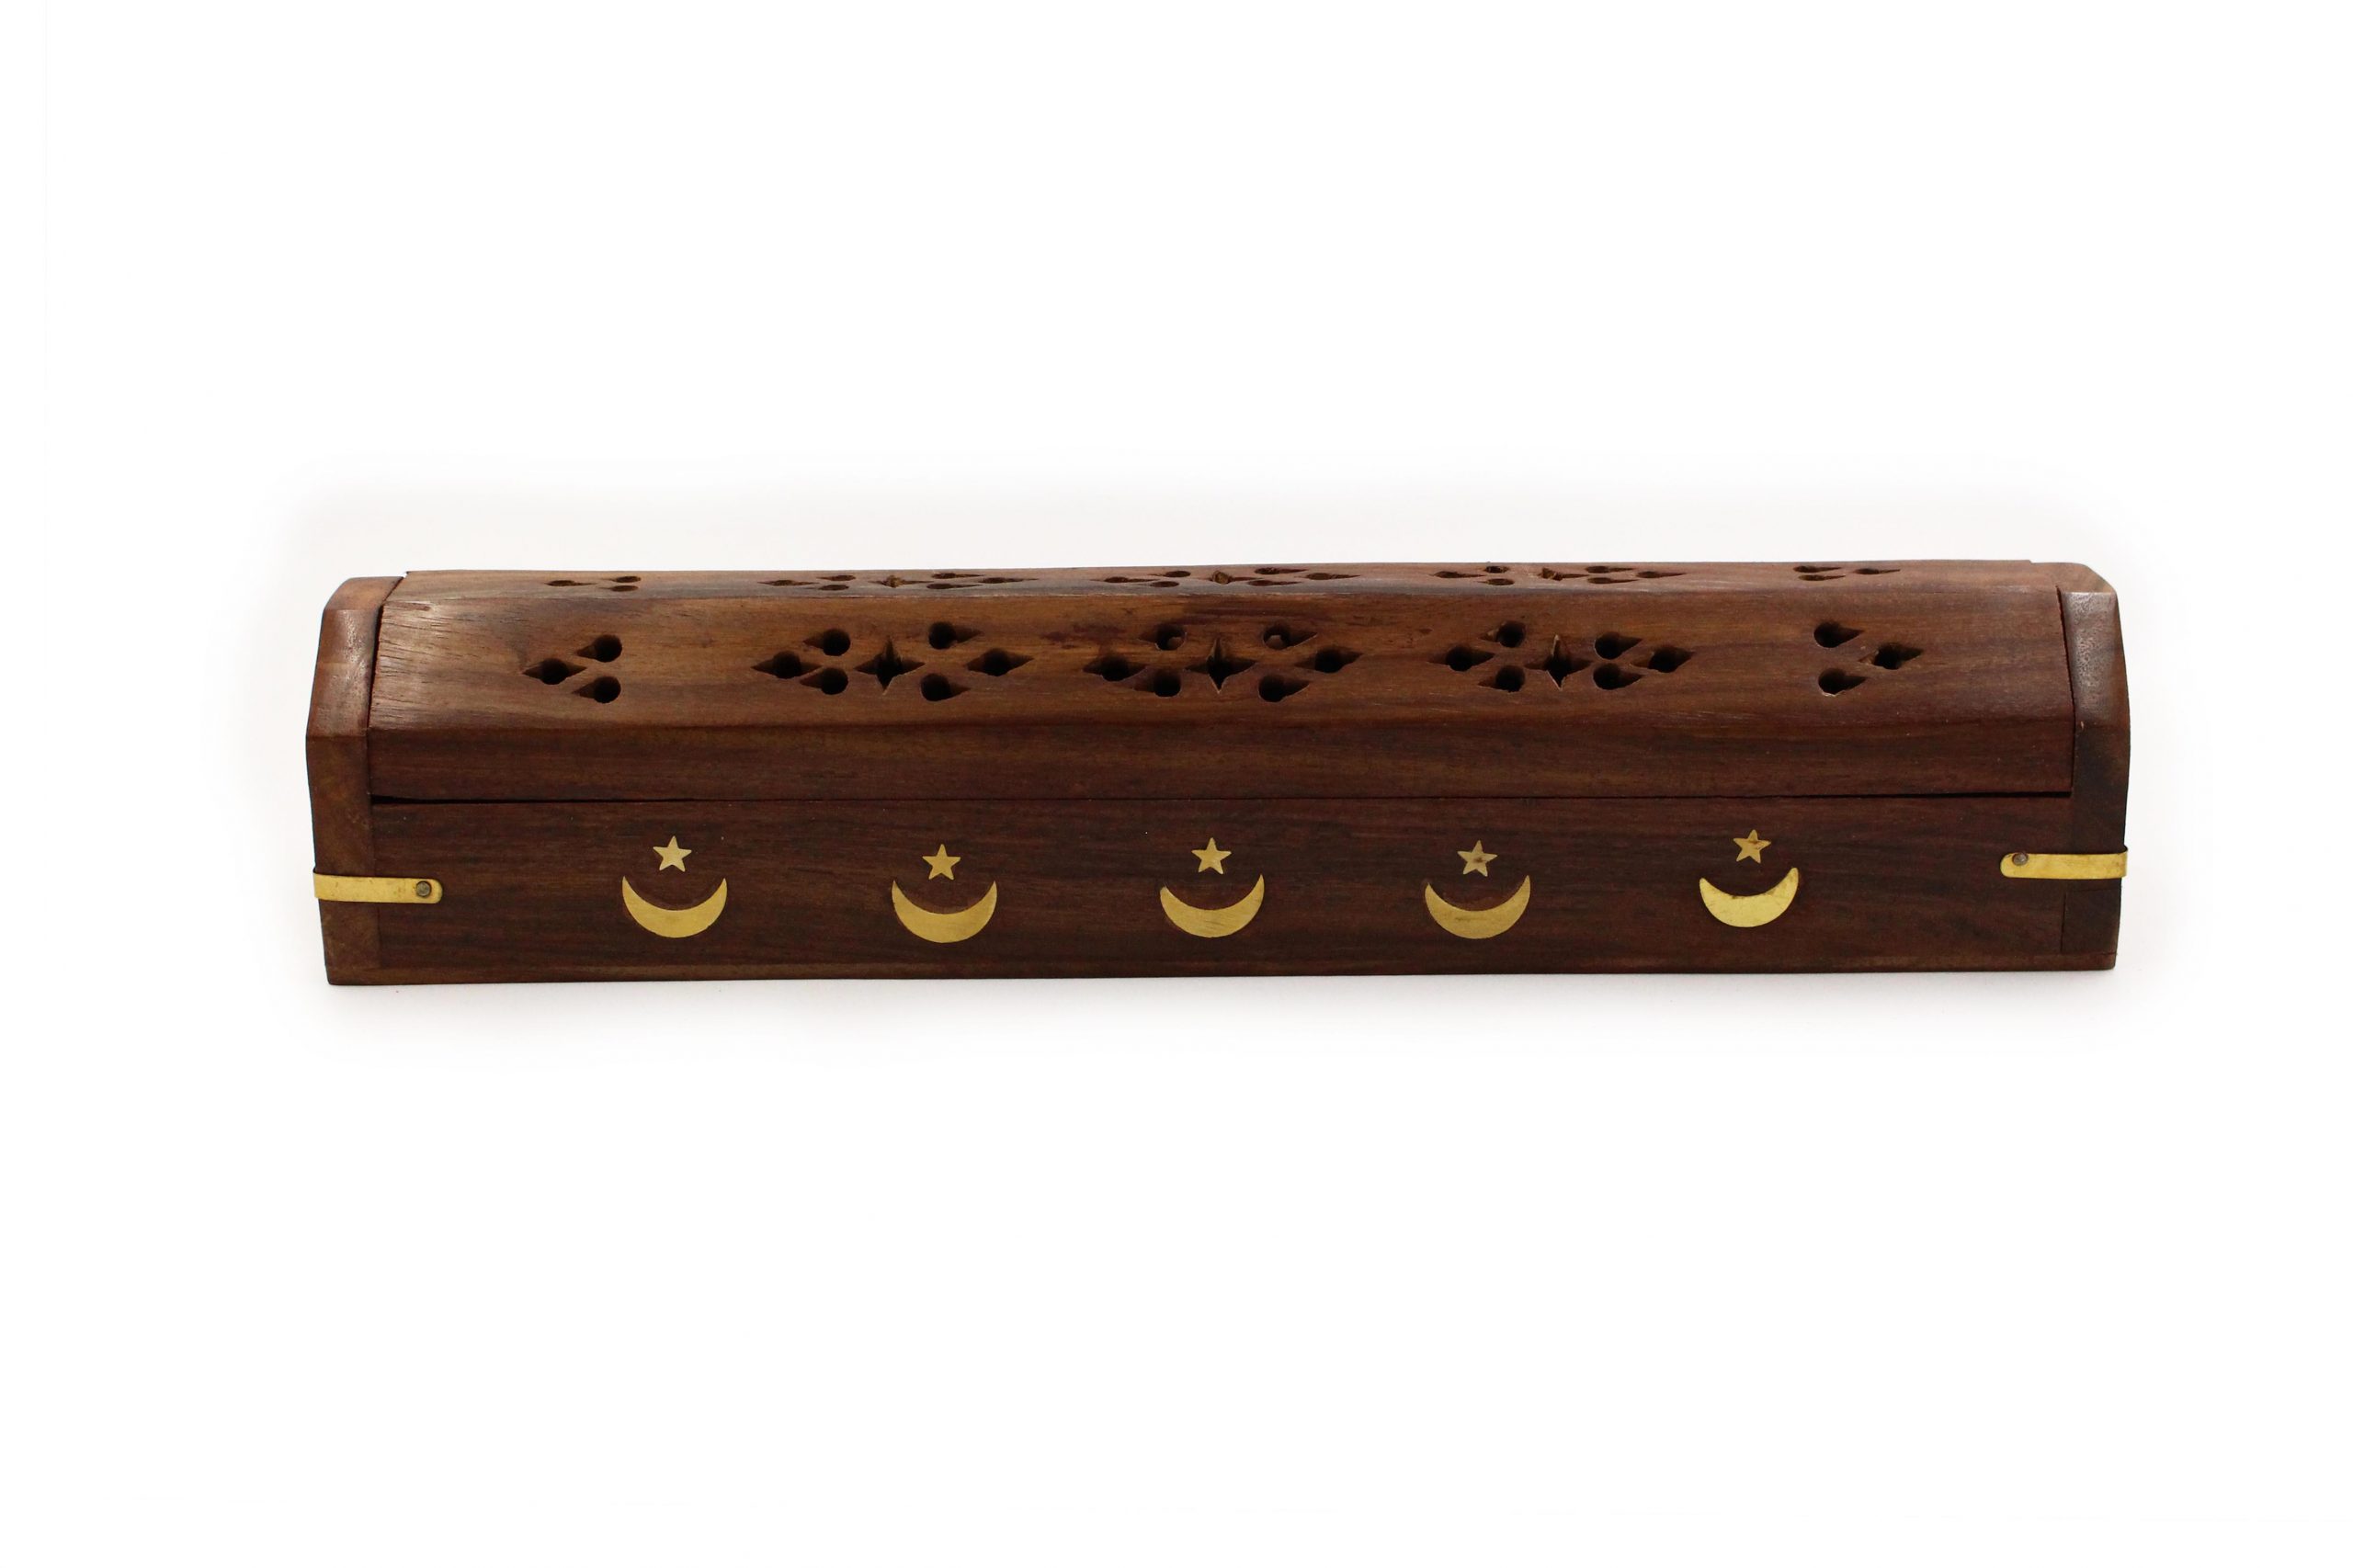 Small Moons and stars Wood Incense Chest Holder - Crystal Dreams